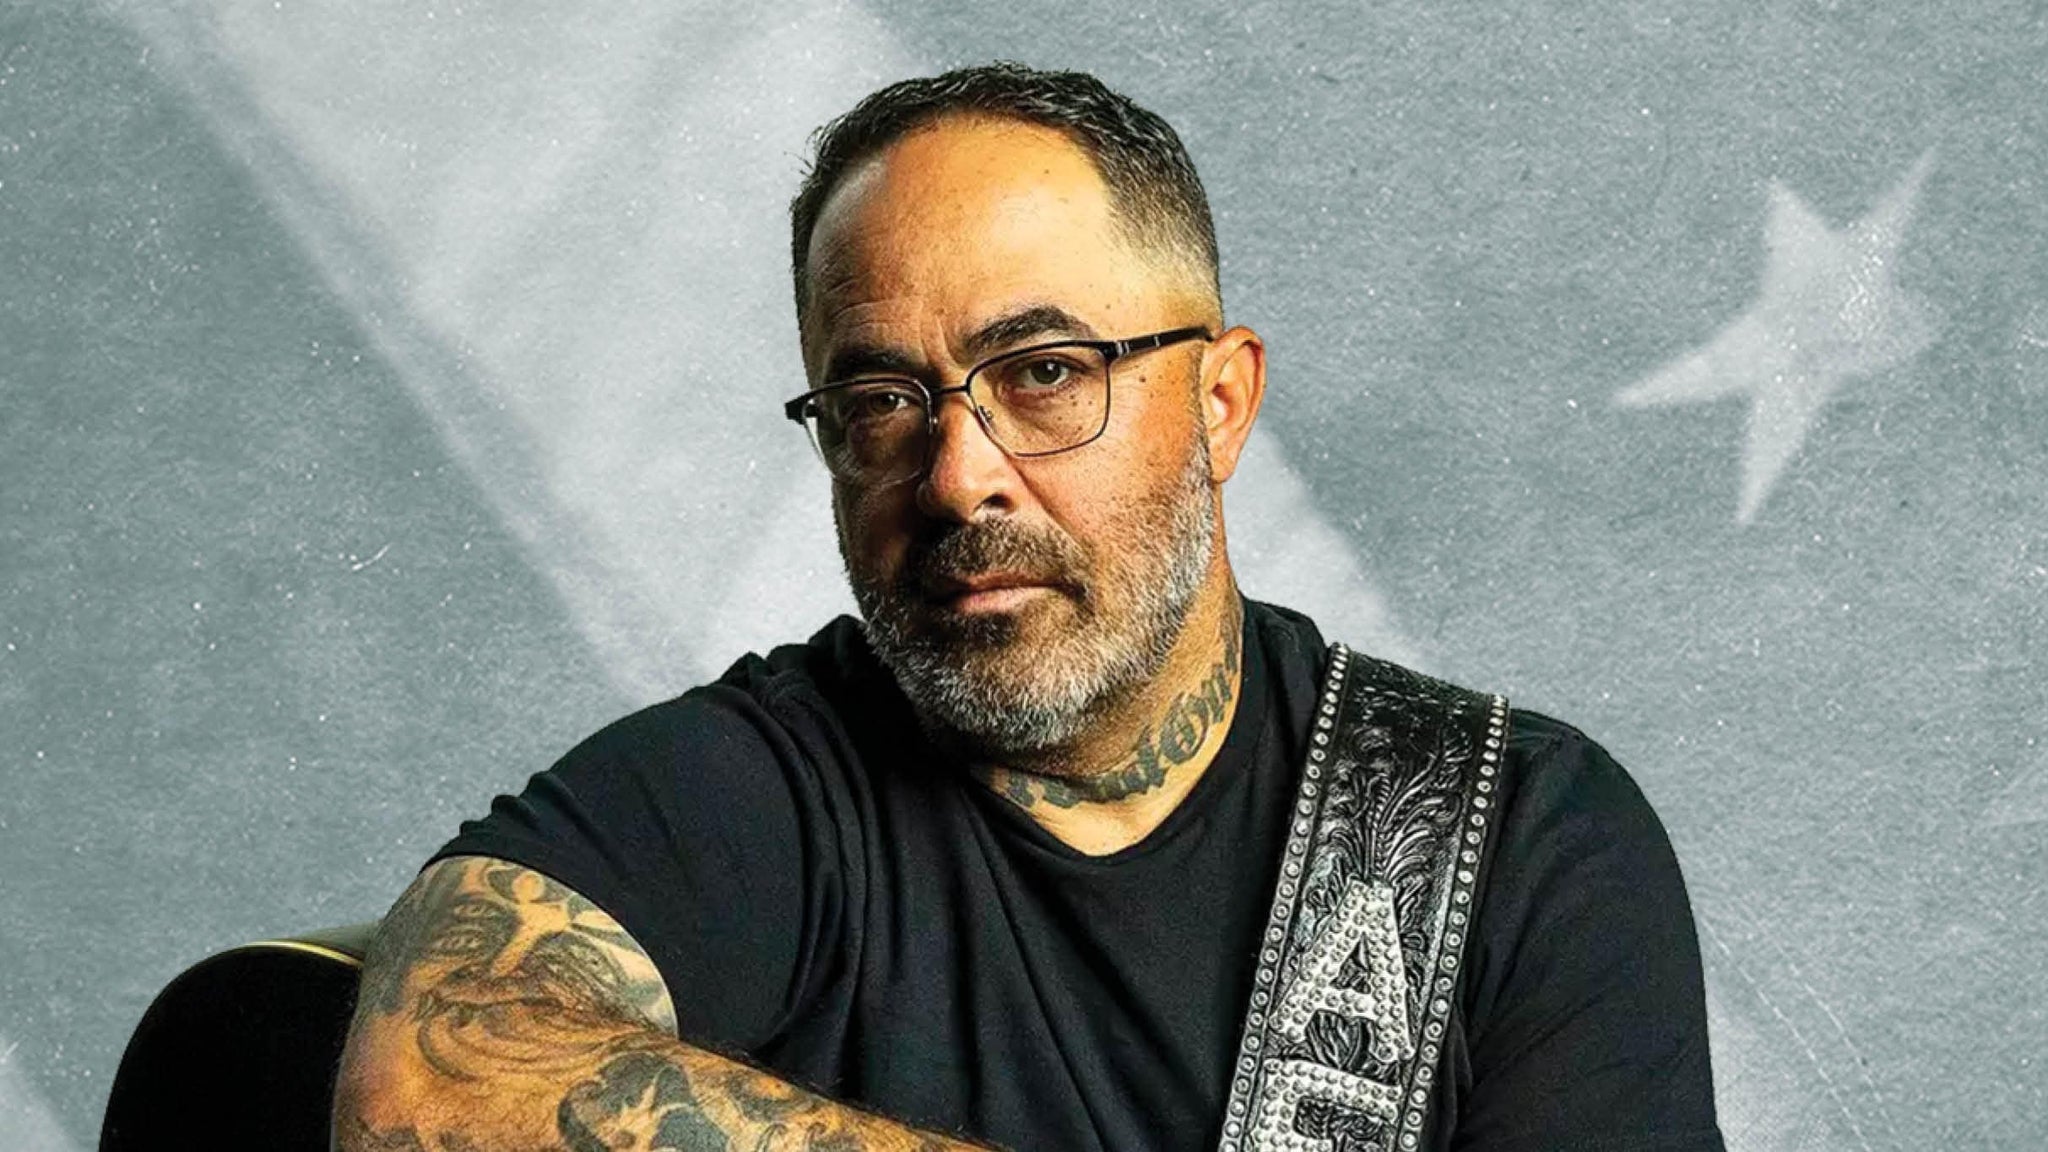 Aaron Lewis Acoustic presale code for show tickets in Verona, NY (The Event Center at Turning Stone Resort Casino)